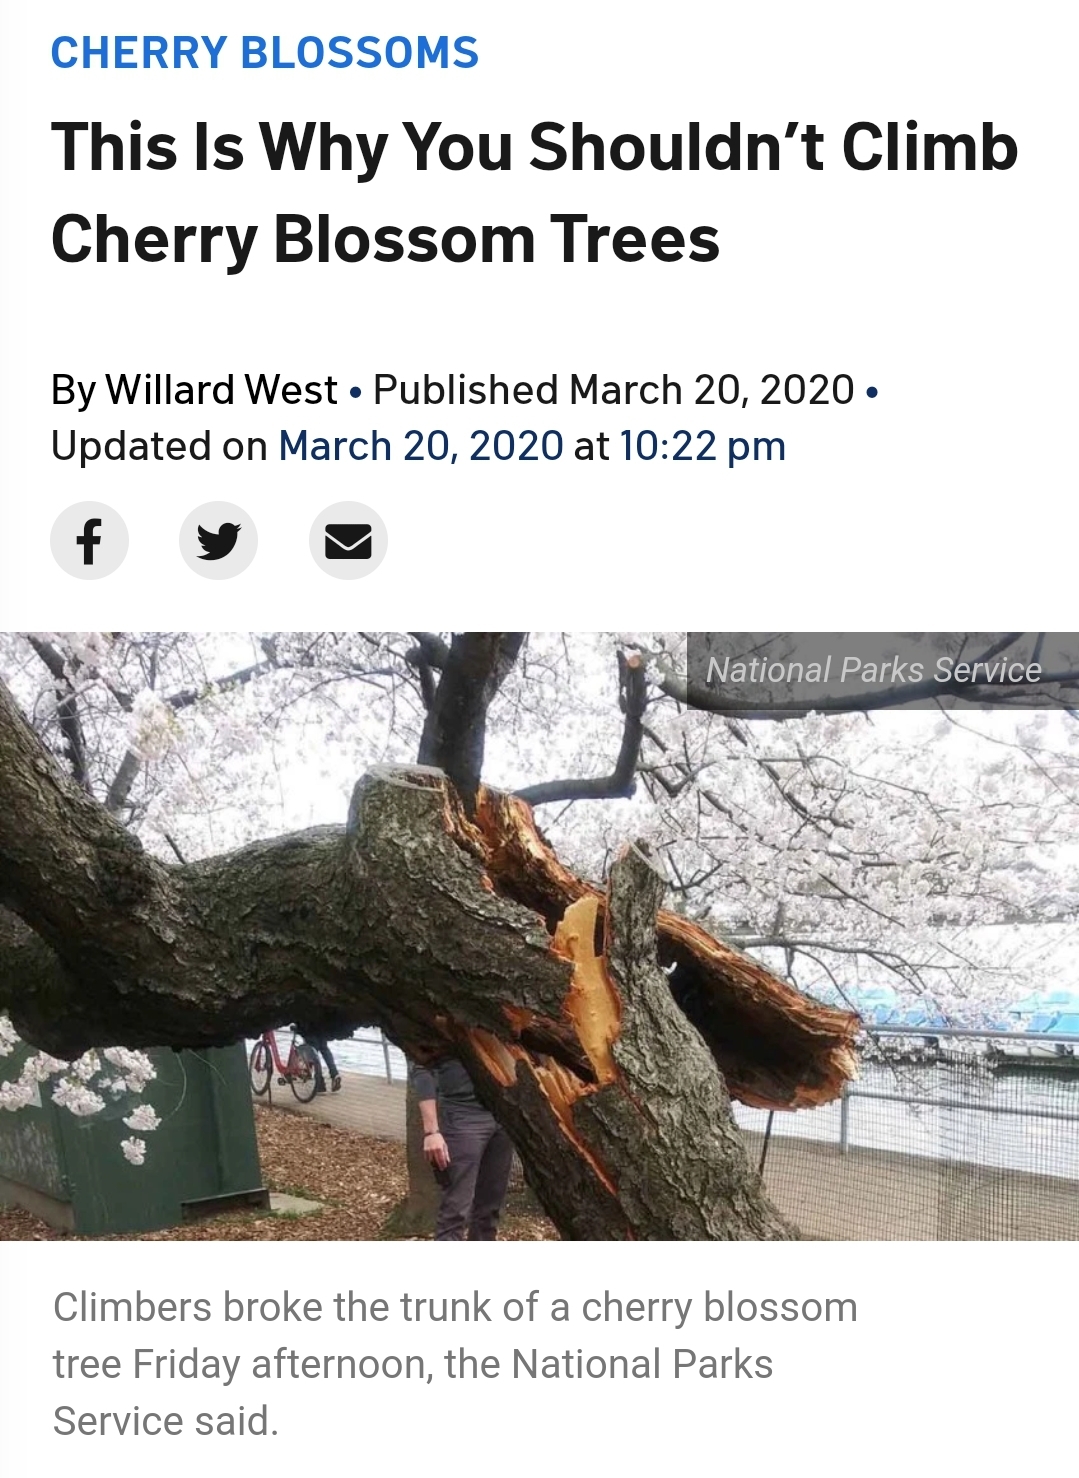 tree - Cherry Blossoms This Is Why You Shouldn't Climb Cherry Blossom Trees By Willard West. Published . Updated on at National Parks Service Climbers broke the trunk of a cherry blossom tree Friday afternoon, the National Parks Service said.